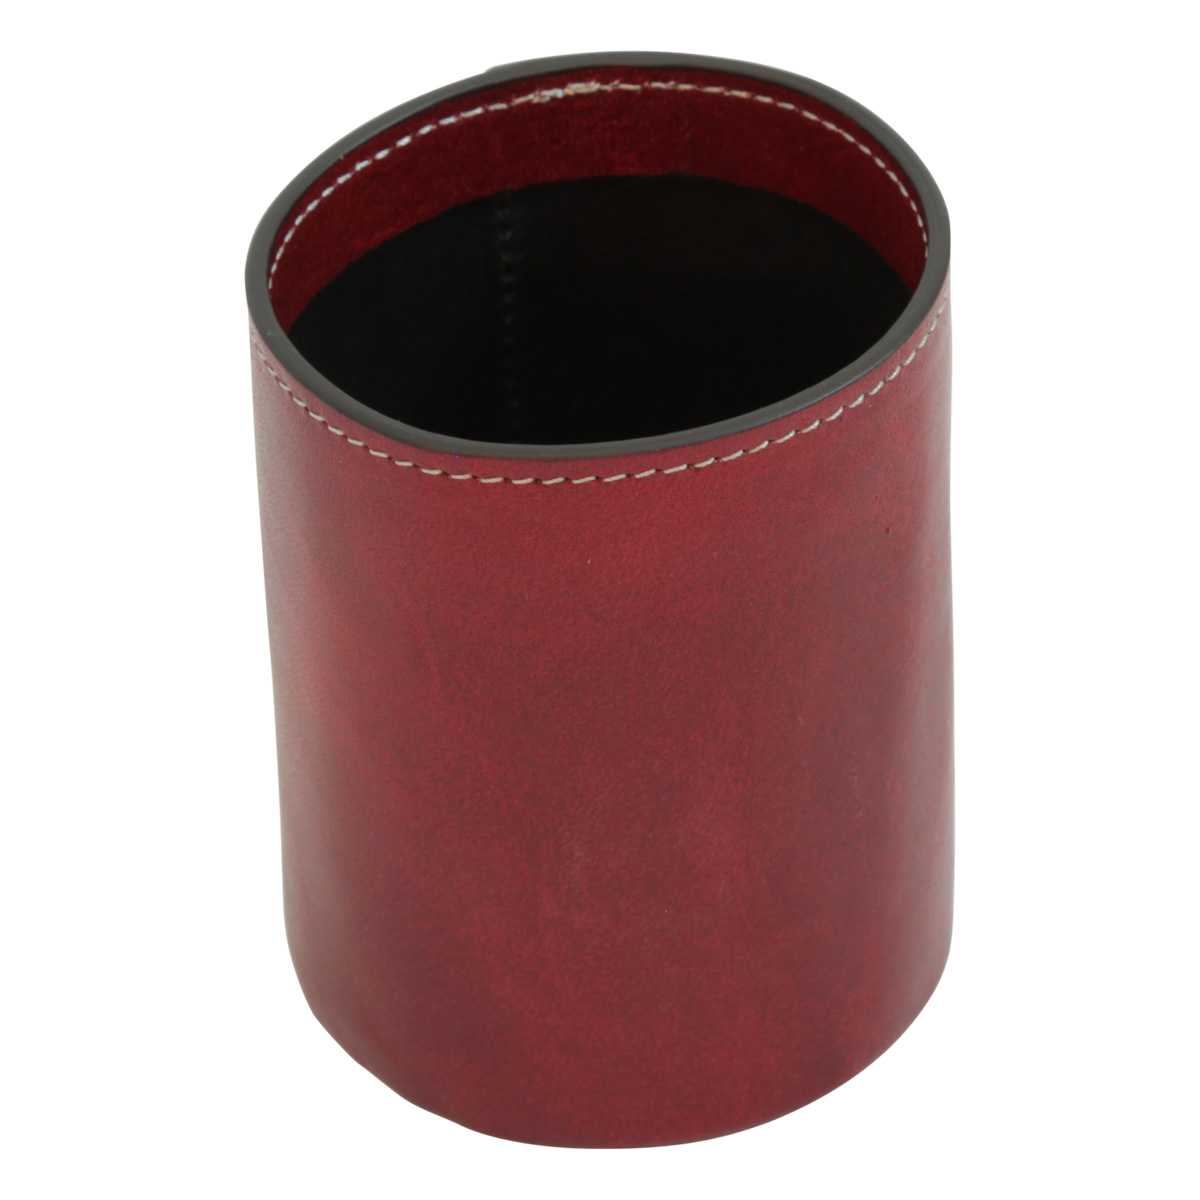 Leather pen cup - red|763089RO|Old Angler Firenze